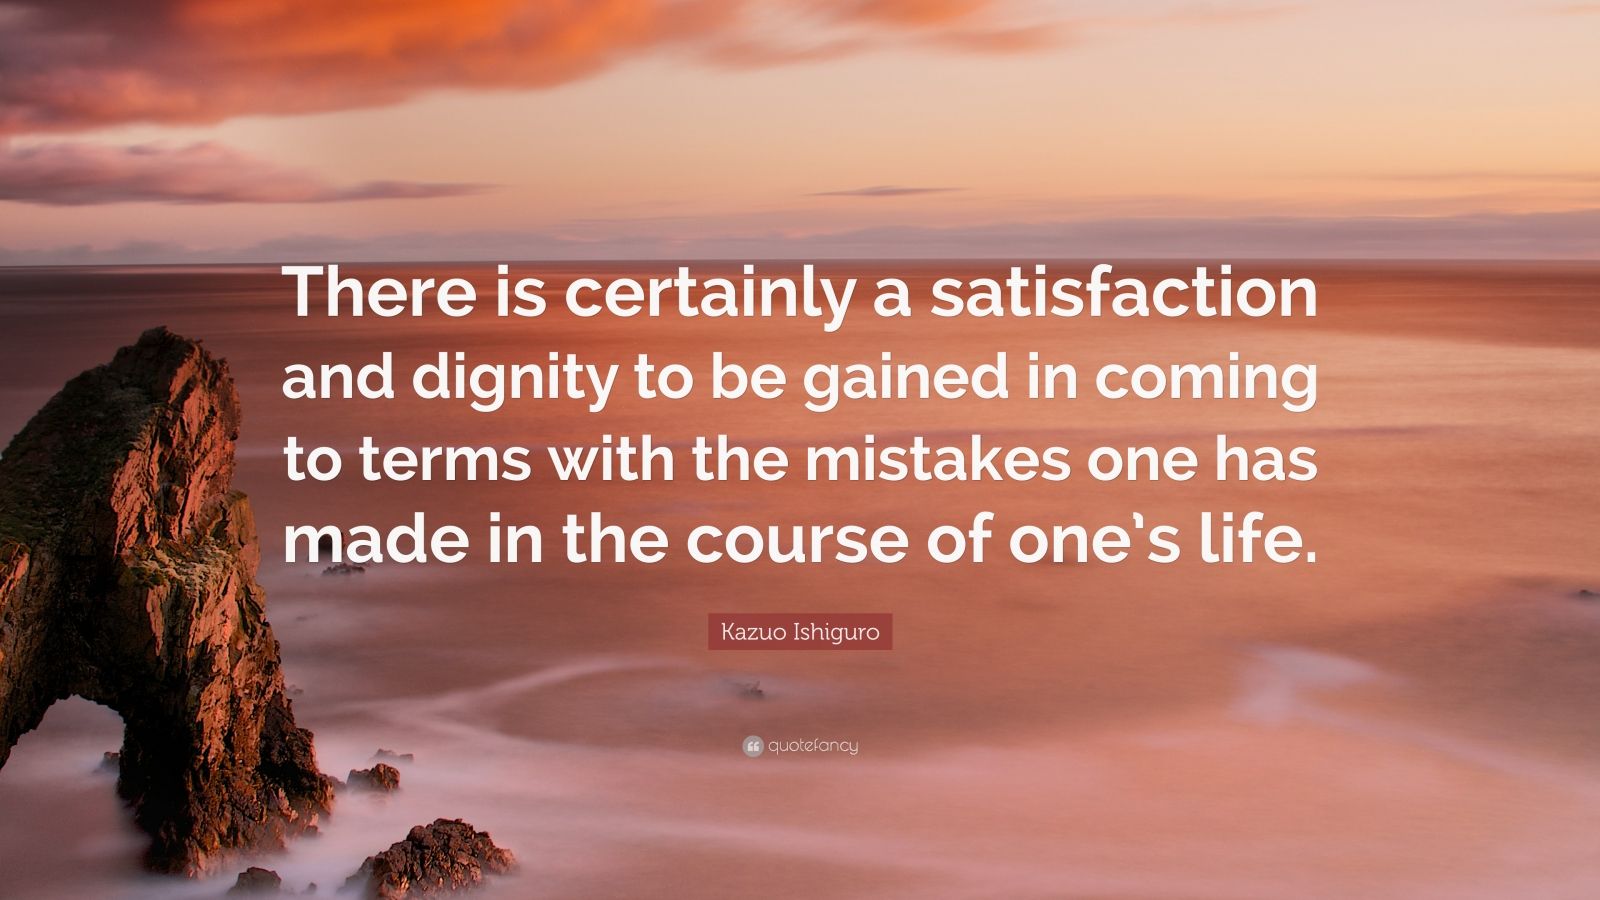 Kazuo Ishiguro Quote: "There is certainly a satisfaction ...